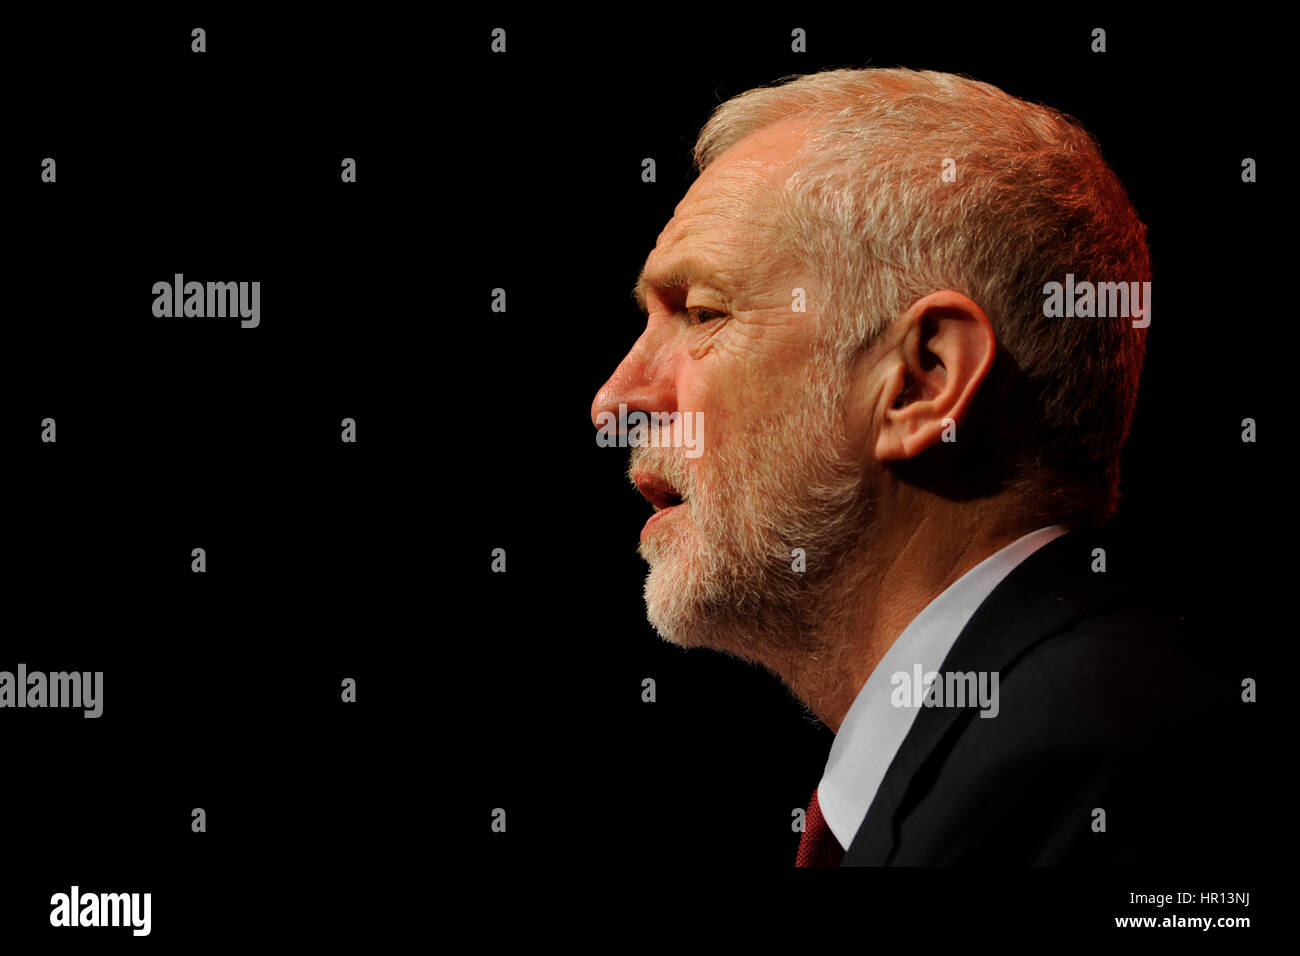 Perth, Scotland, UK. 26th February 2017. Labour leader Jeremy Corbyn addresses the Scottish Labour Party conference in Perth, Credit: Ken Jack/Alamy Live News Stock Photo